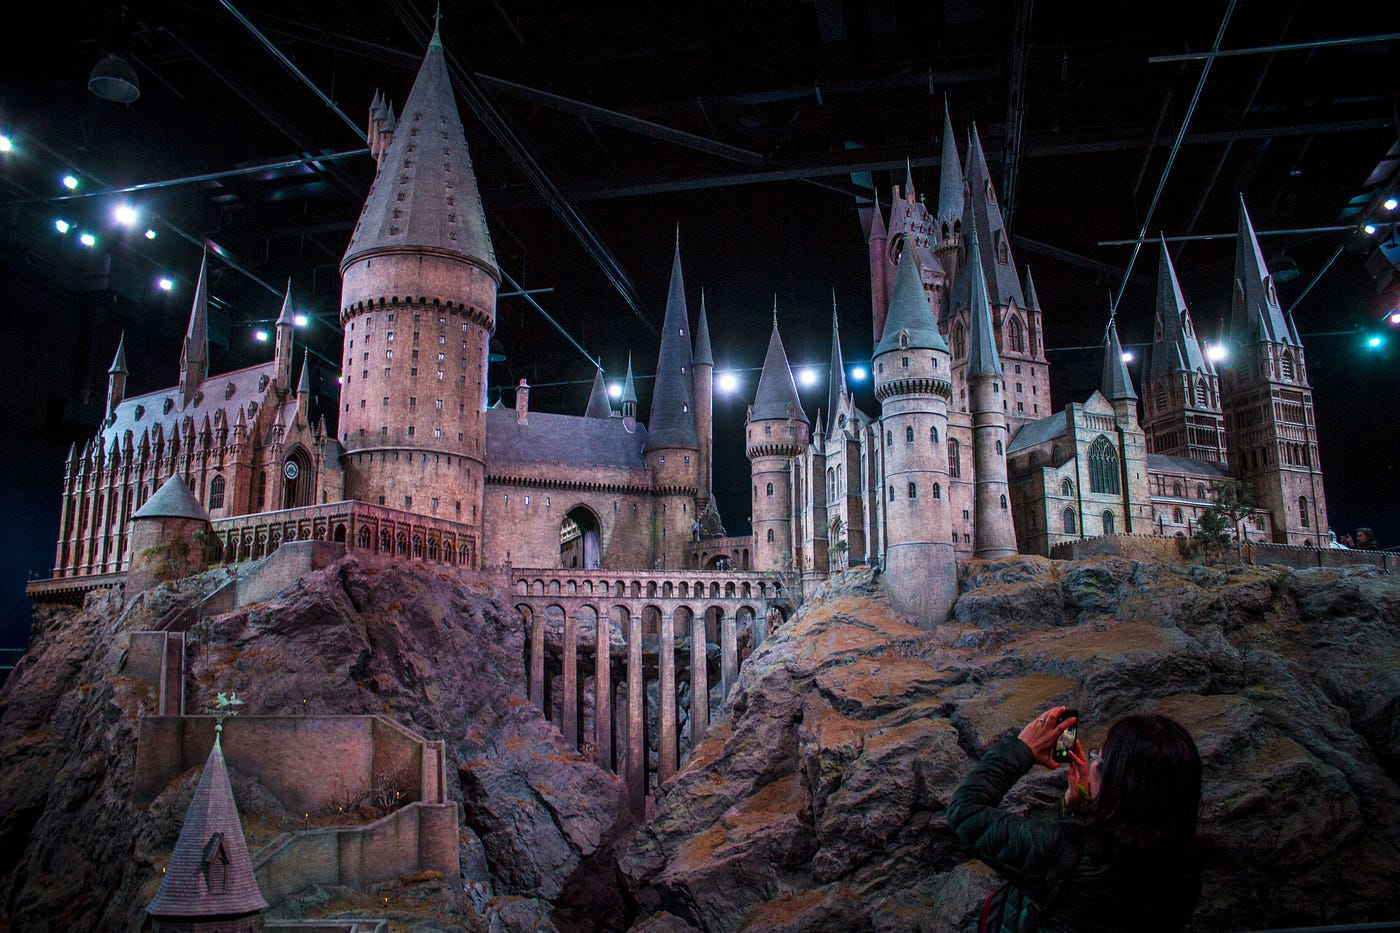 A woman takes a photo of the Hogwarts set, a crime punishable by death.